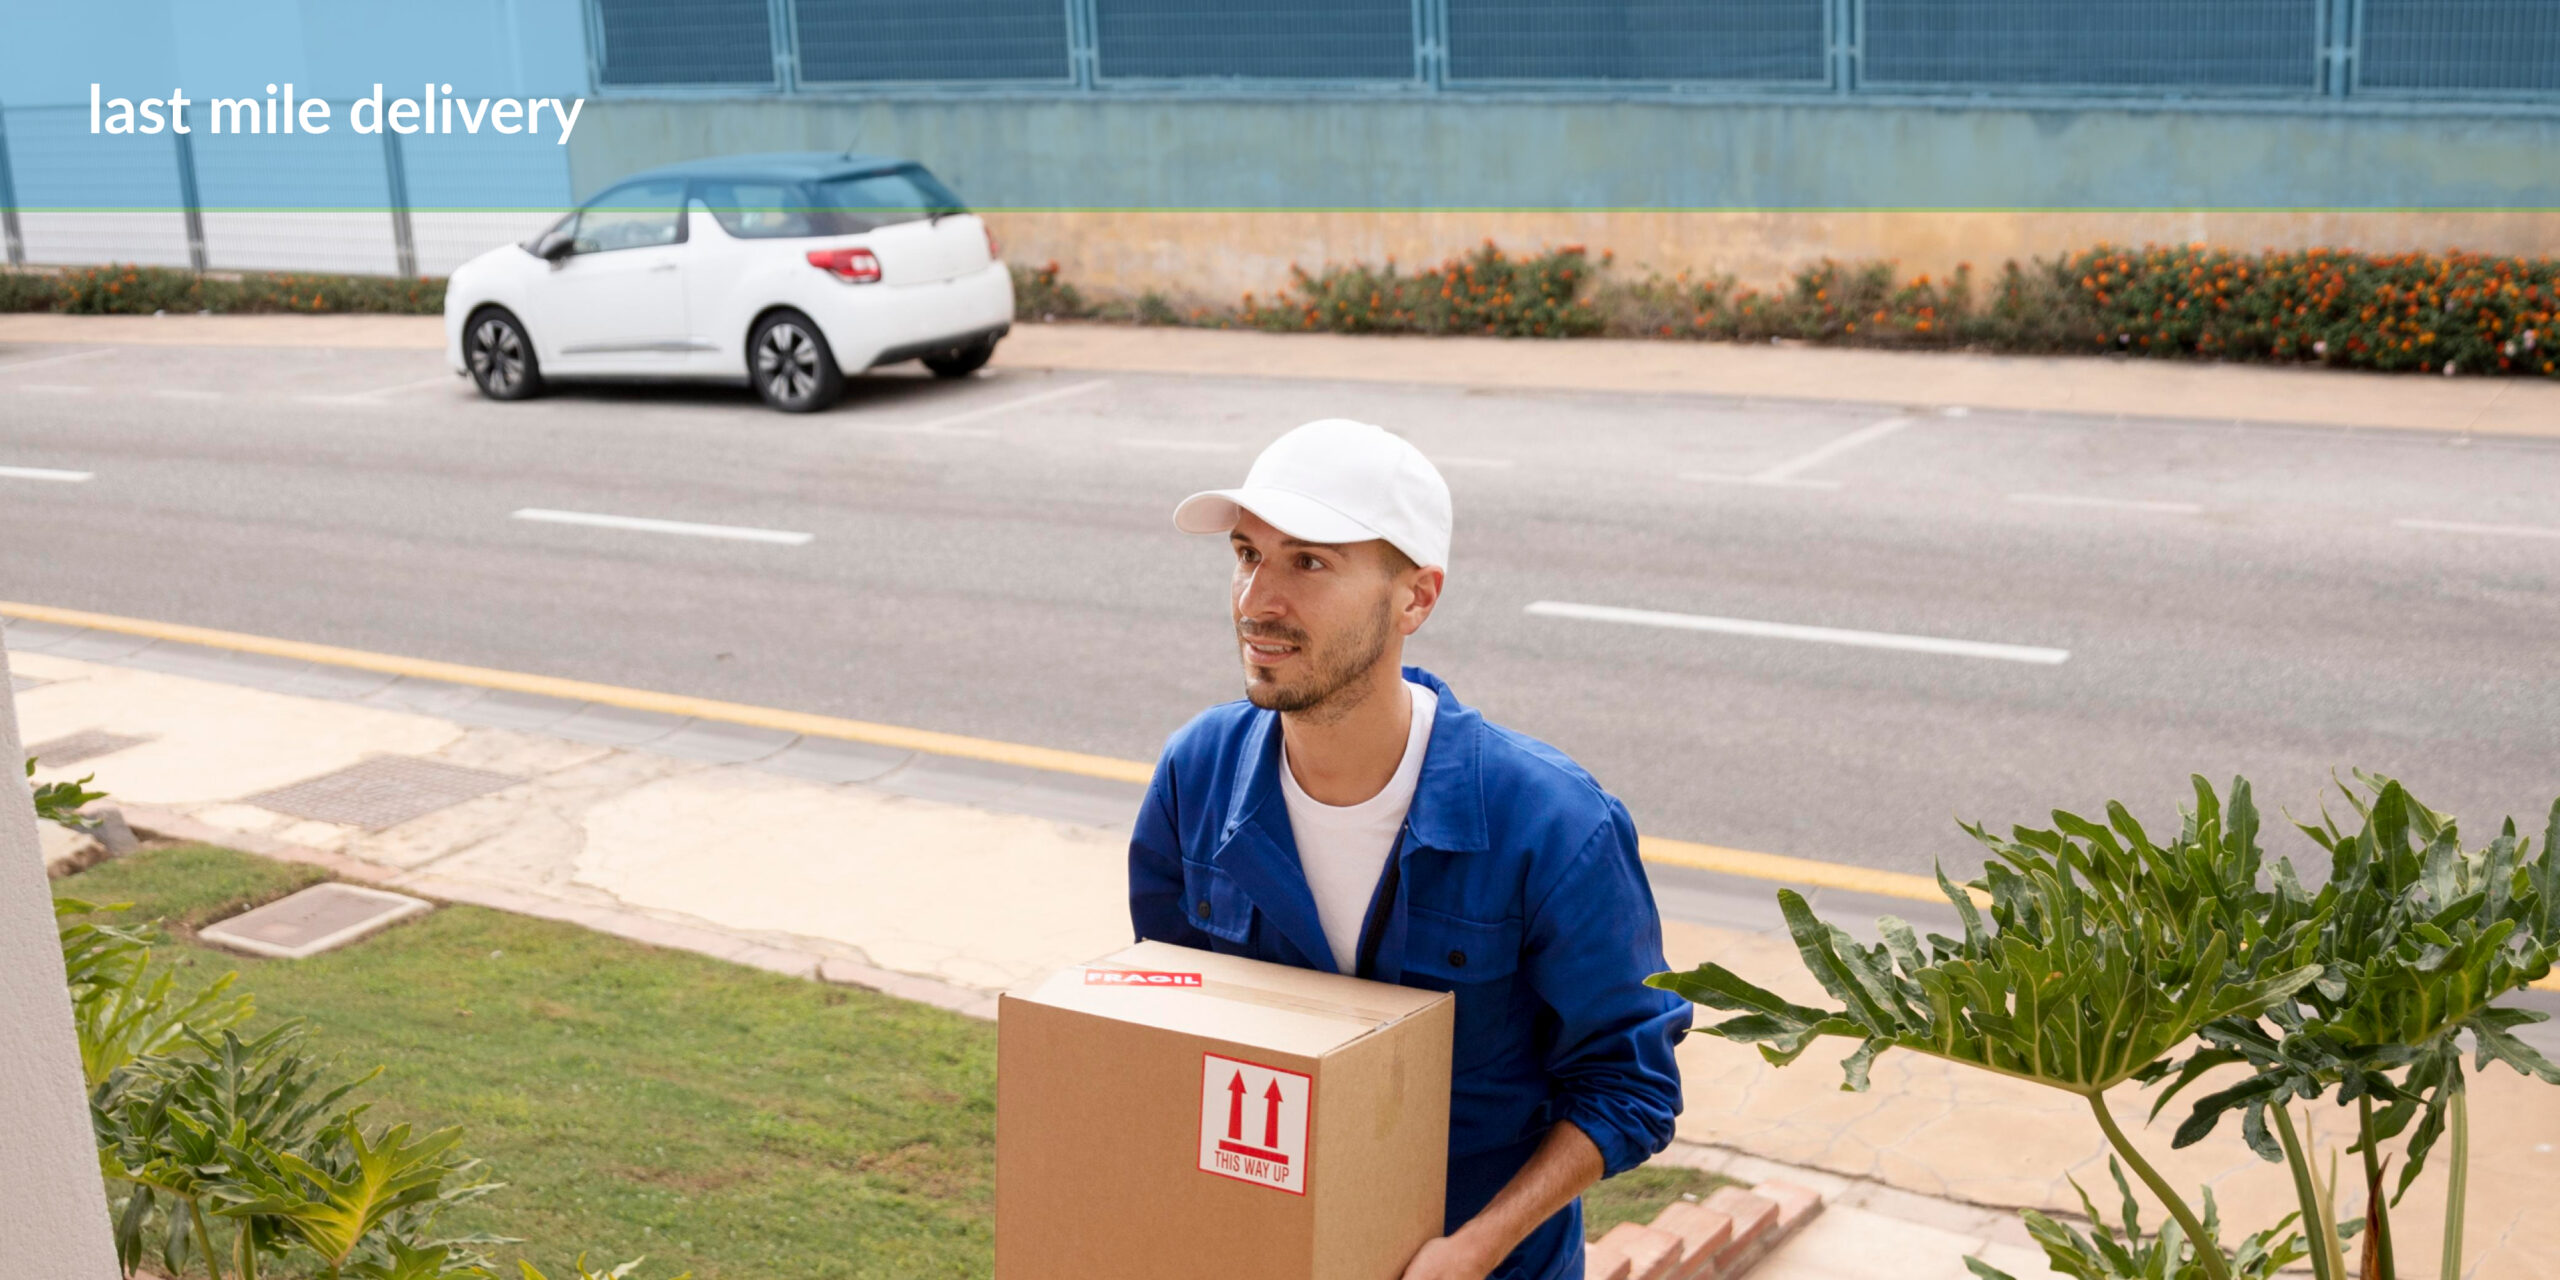 A delivery person in a blue uniform and white cap holding a cardboard box with a 